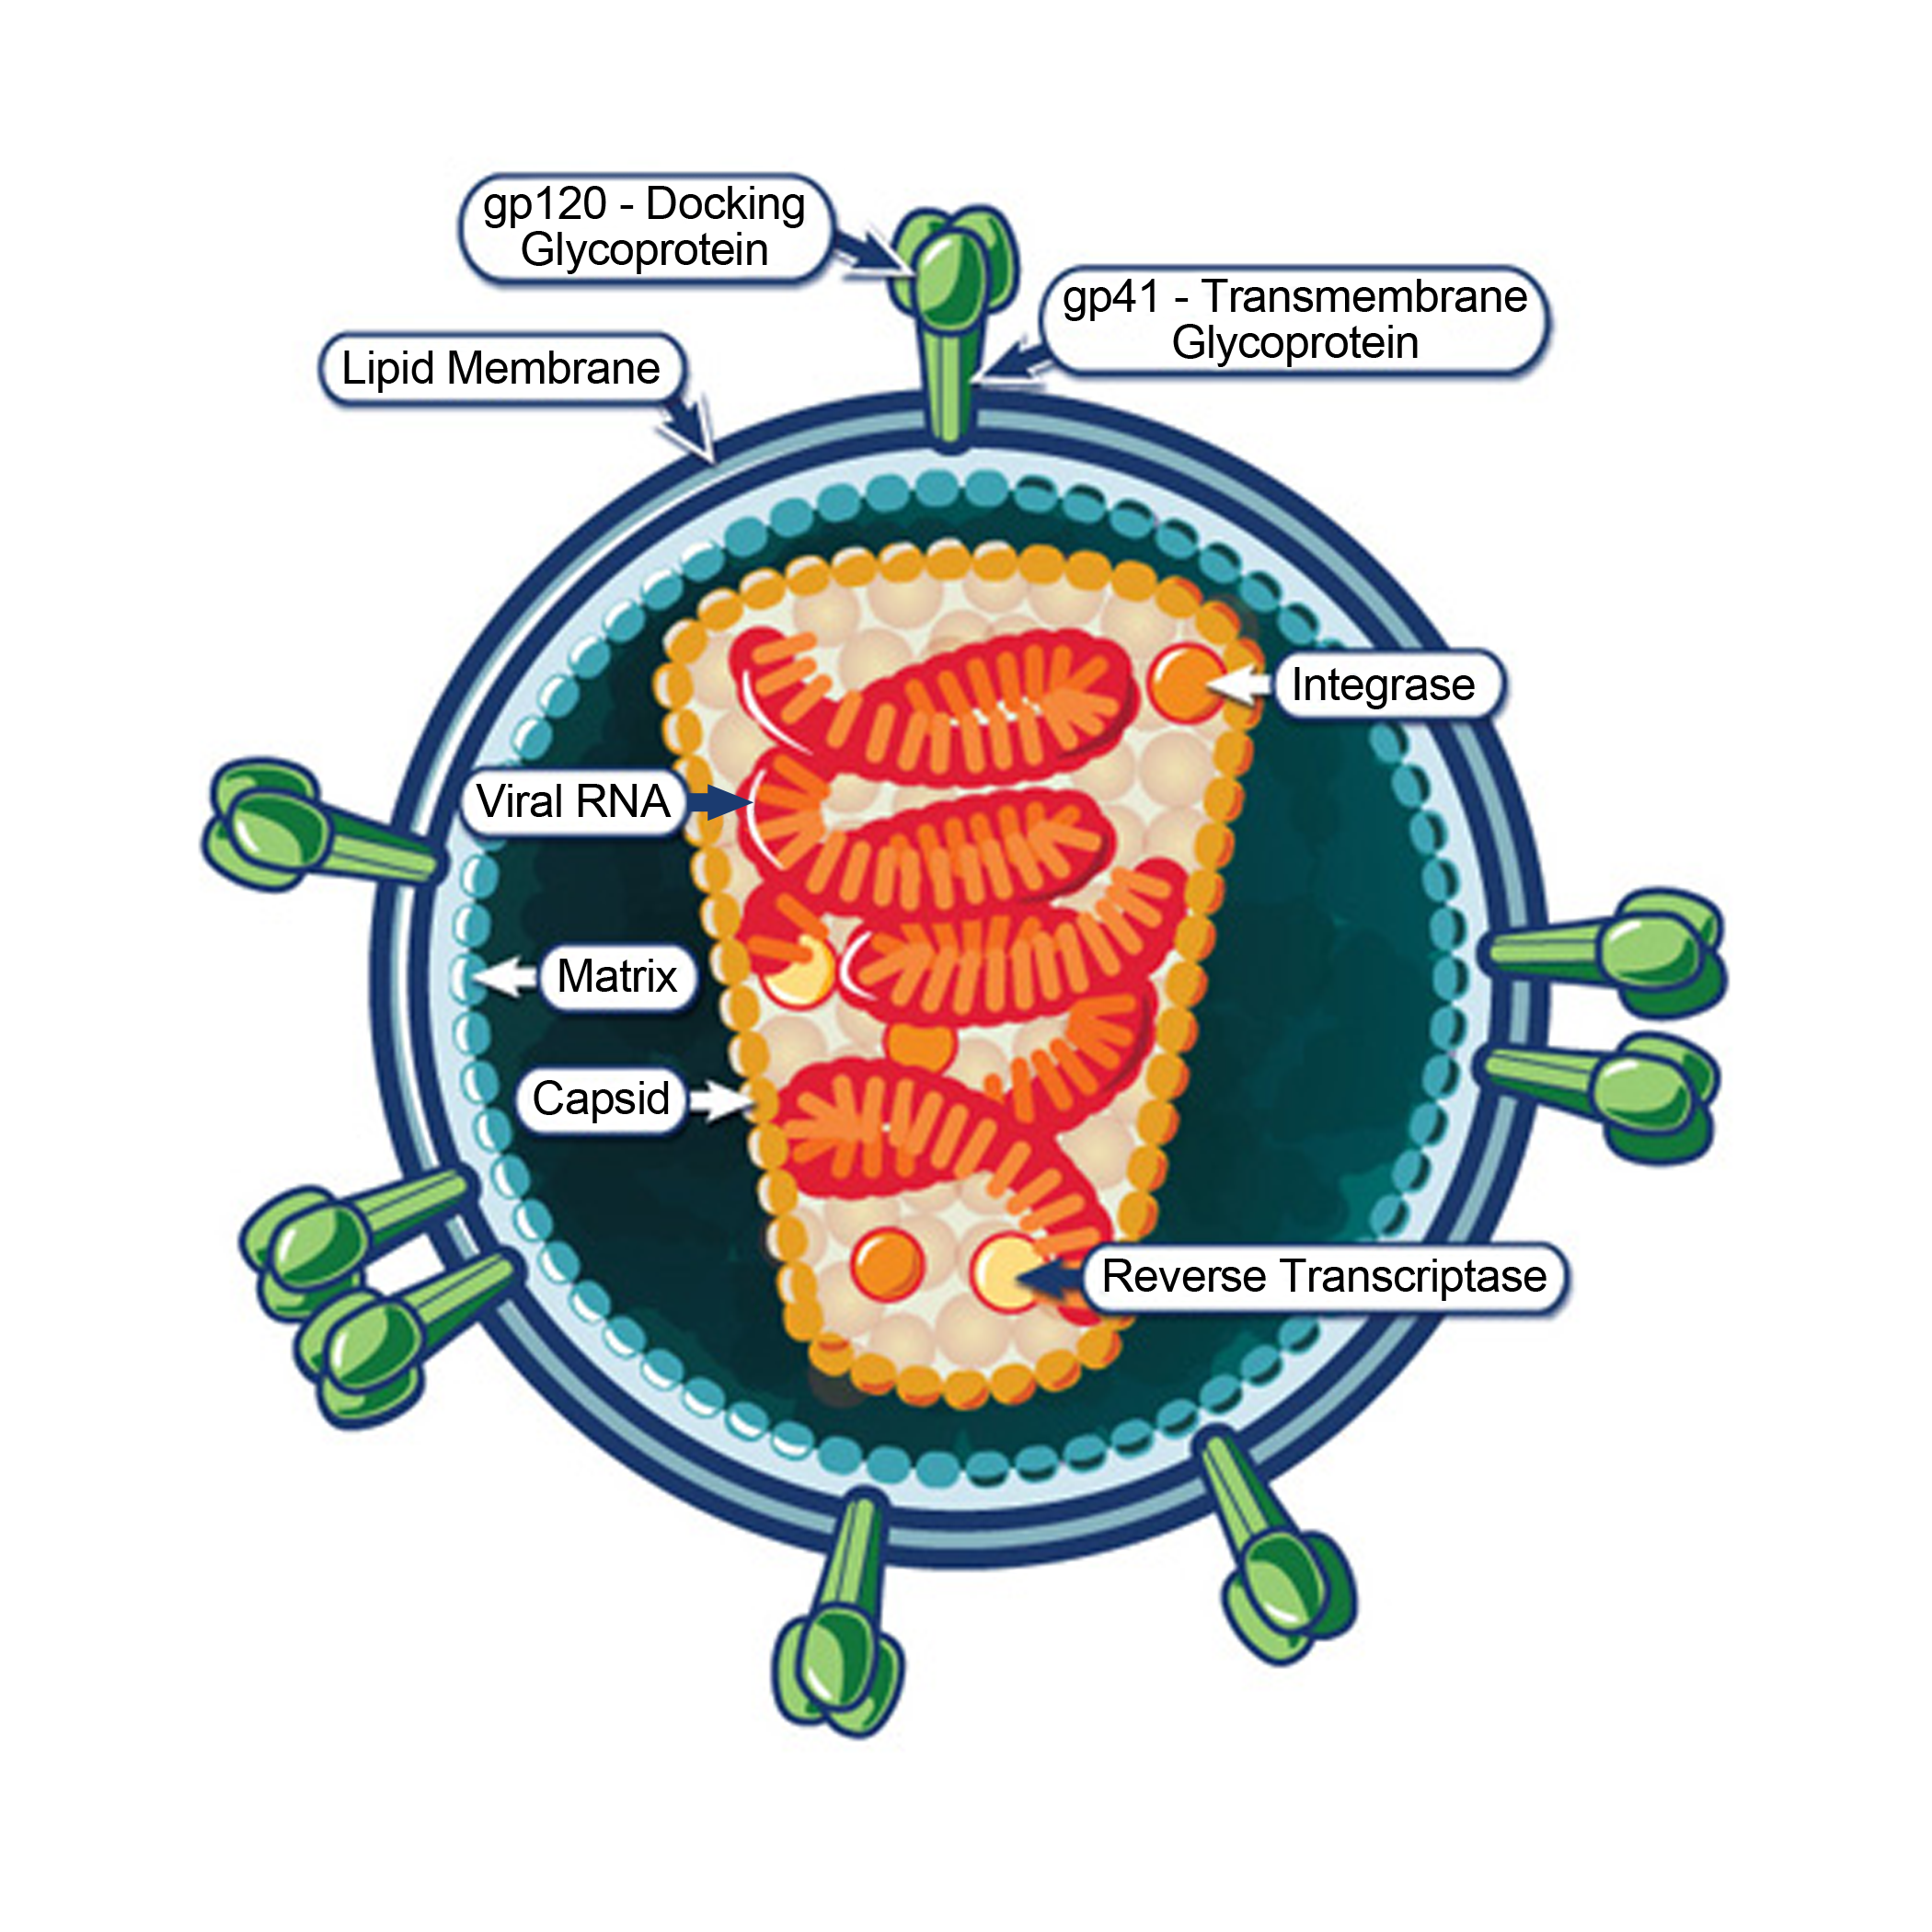 The working of HIV, the cause of AIDS. Courtesy the National Institute of Allergy and Infectious Diseases